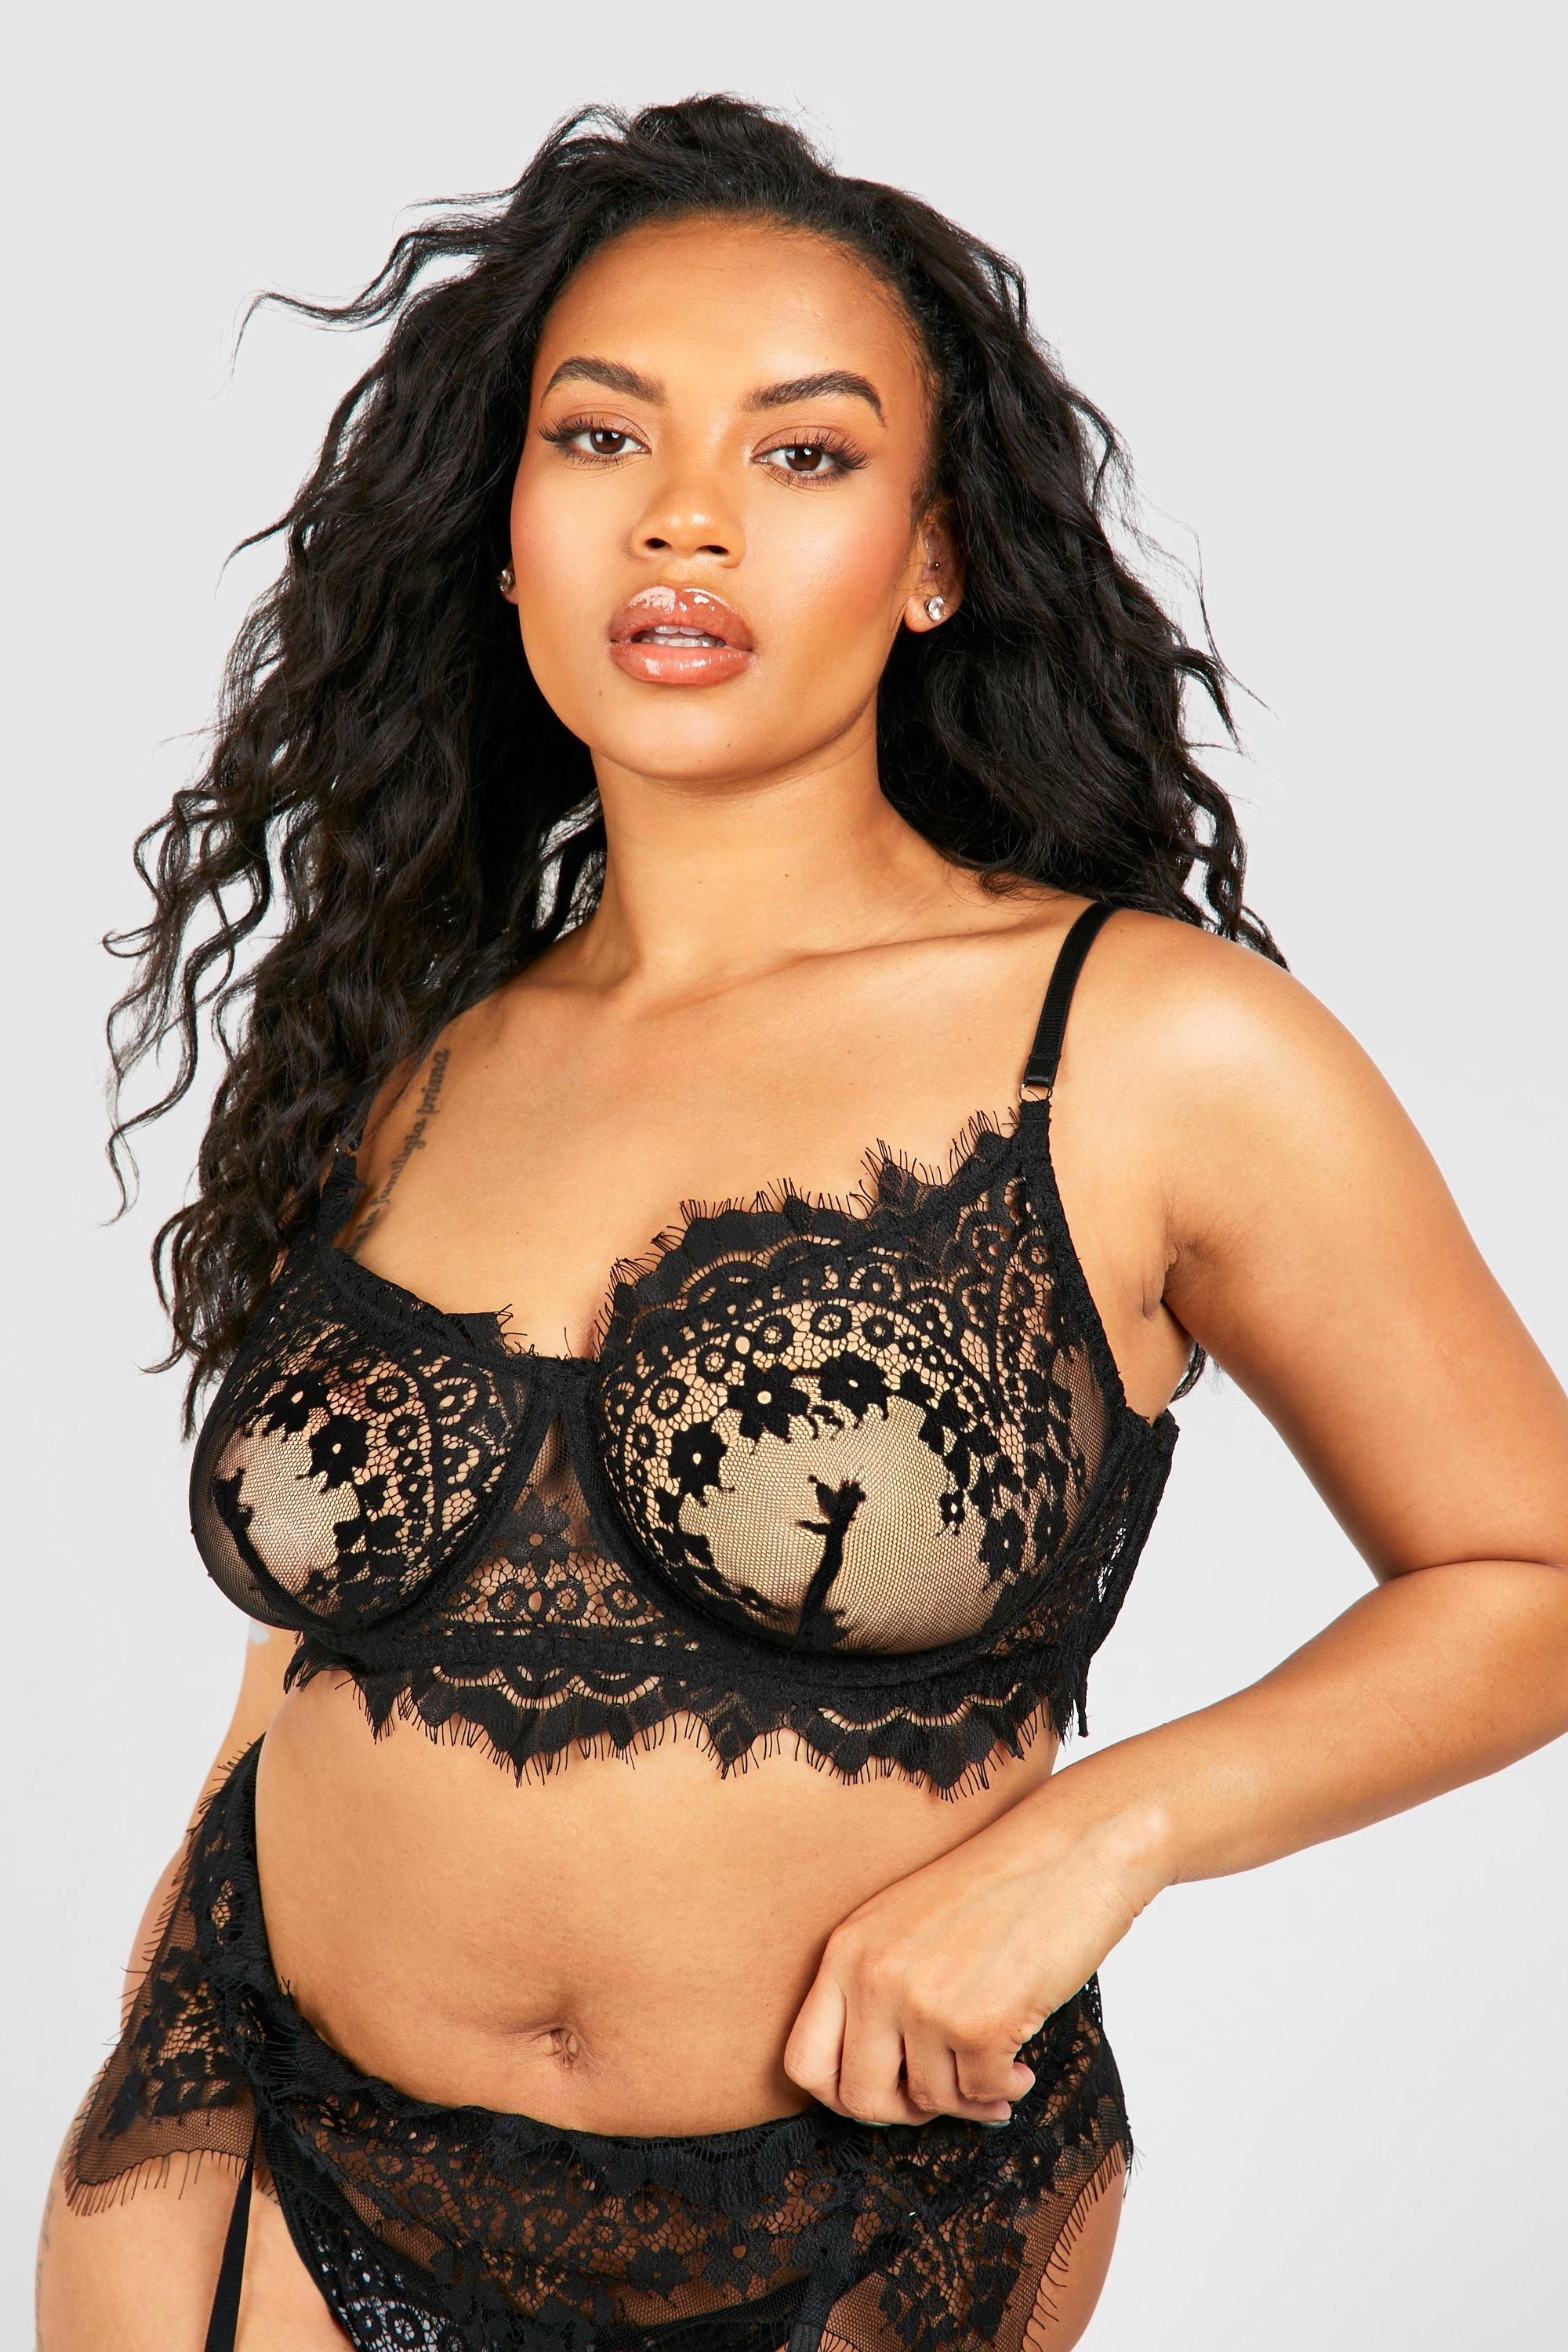 Plus Size Lingerie and Sleepwear at Above Average